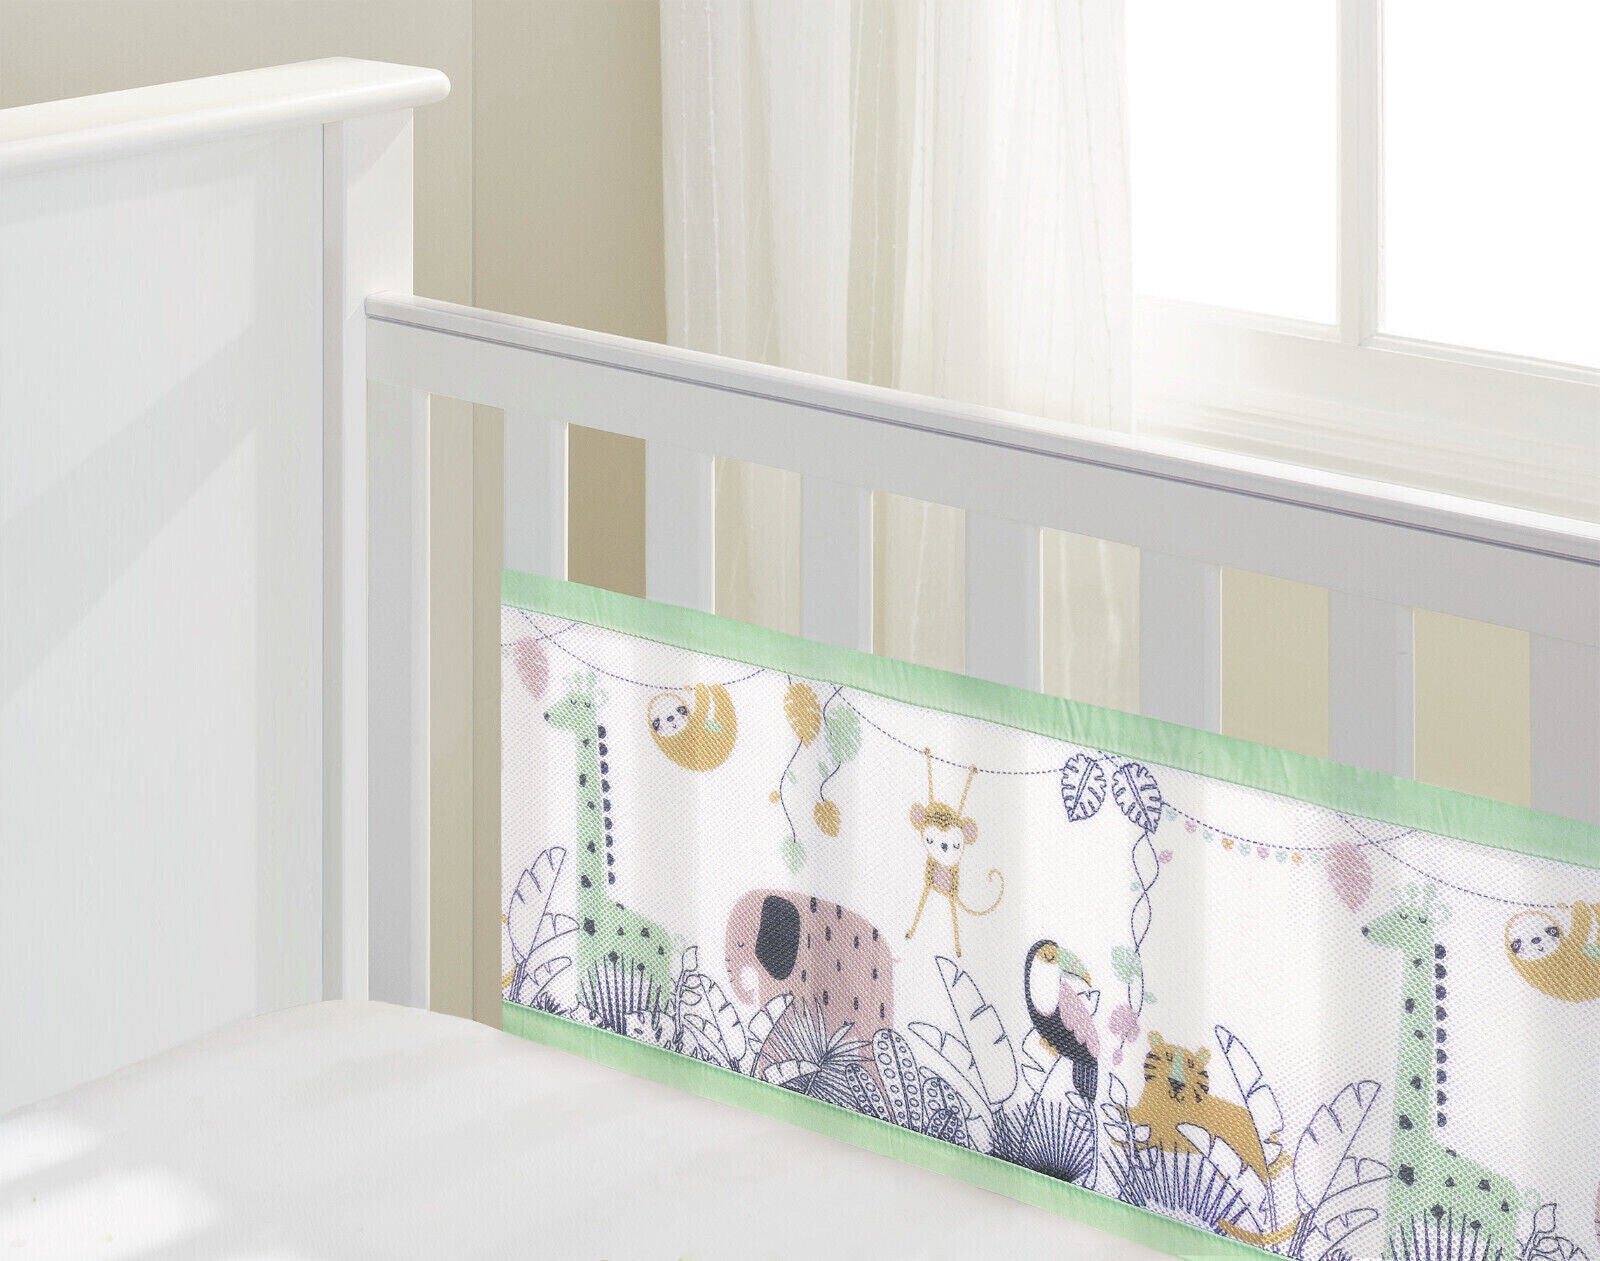 BreathableBaby 2 sided mesh cot/cotbed liner Rainforest